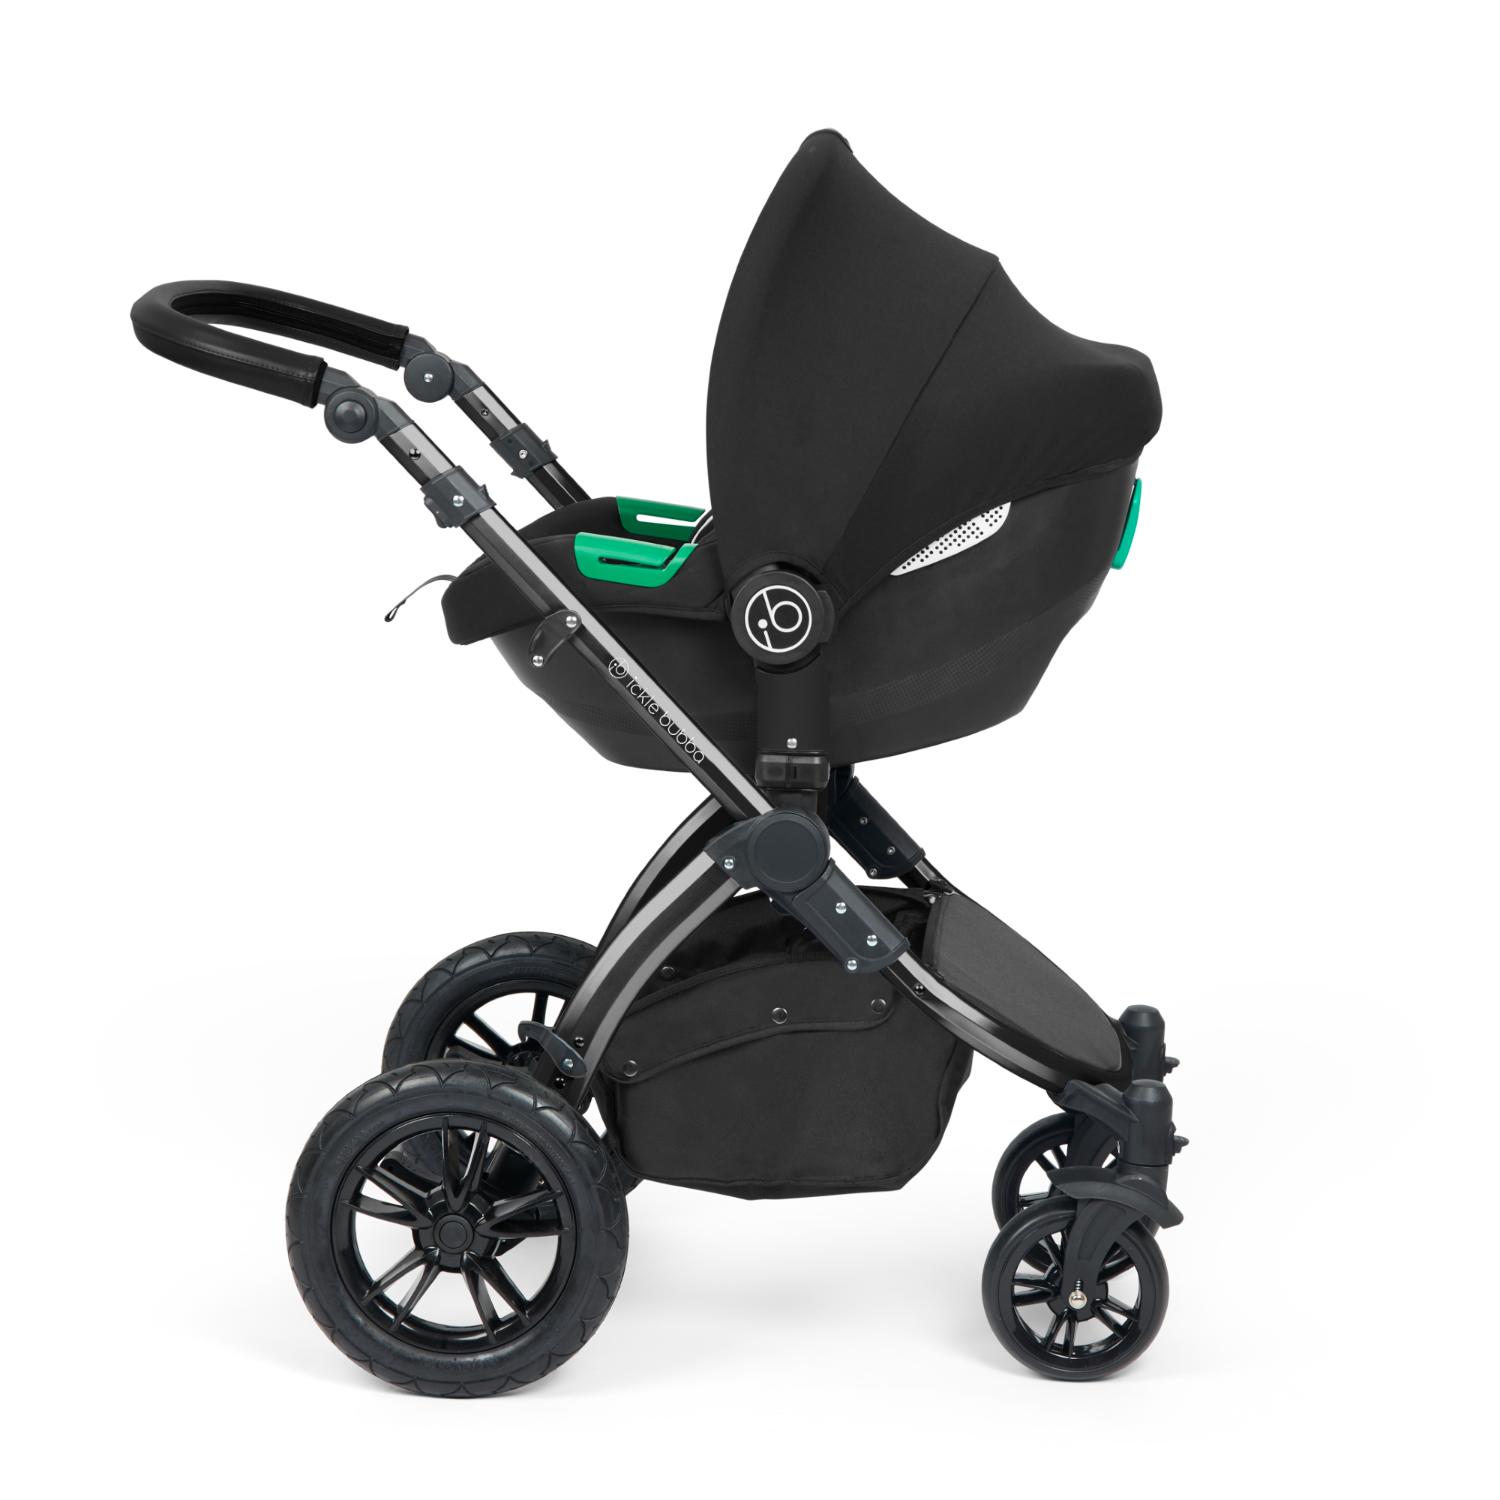 Ickle Bubba Stomp Luxe Pushchair with Cirrus i-Size car seat attached in Midnight black colour